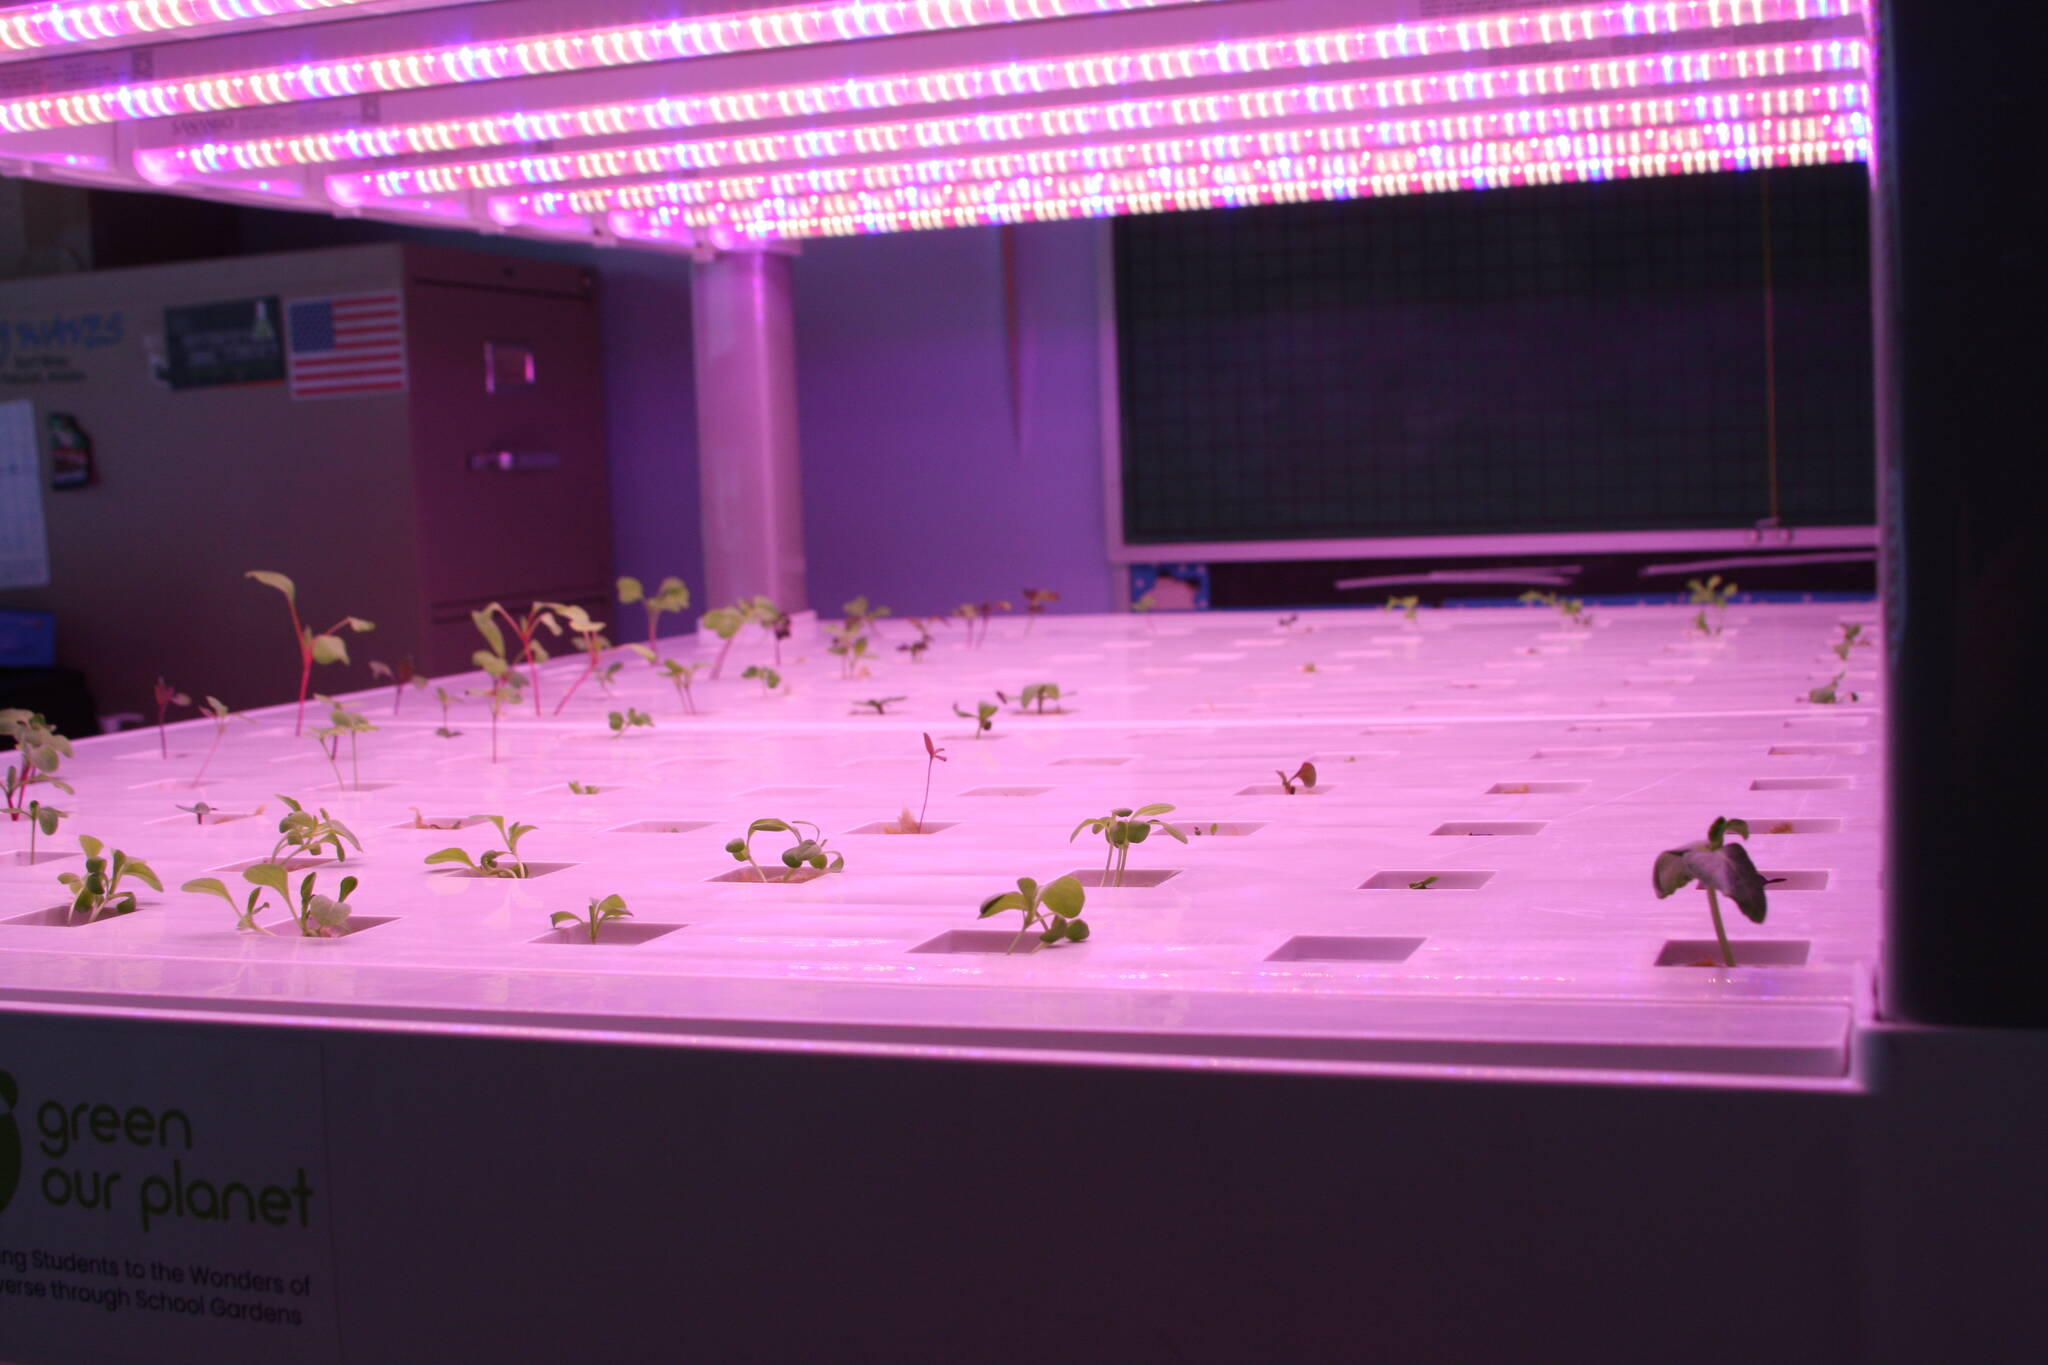 Plants are sprouting in the large flood table on Tuesday, Feb. 14, 2023 in the hydroponics room at Nikolaevsk School in Nikolaevsk, Alaska. Photo by Delcenia Cosman